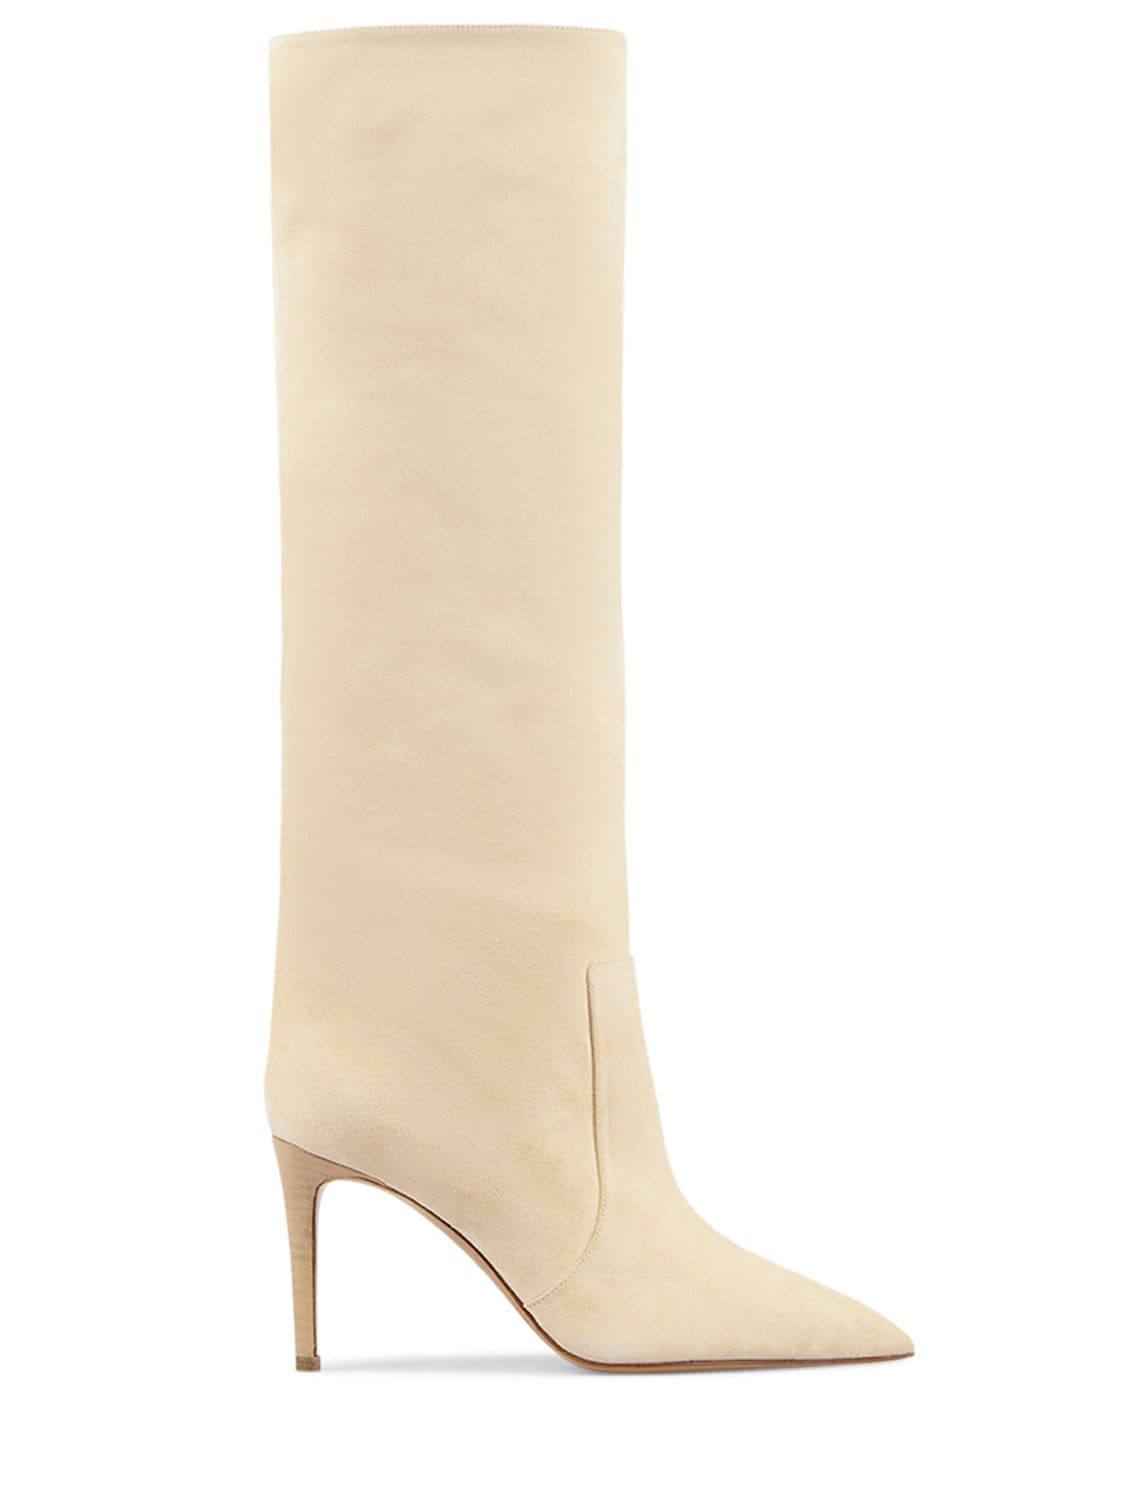 Image of 85mm Stiletto Suede Tall Boots